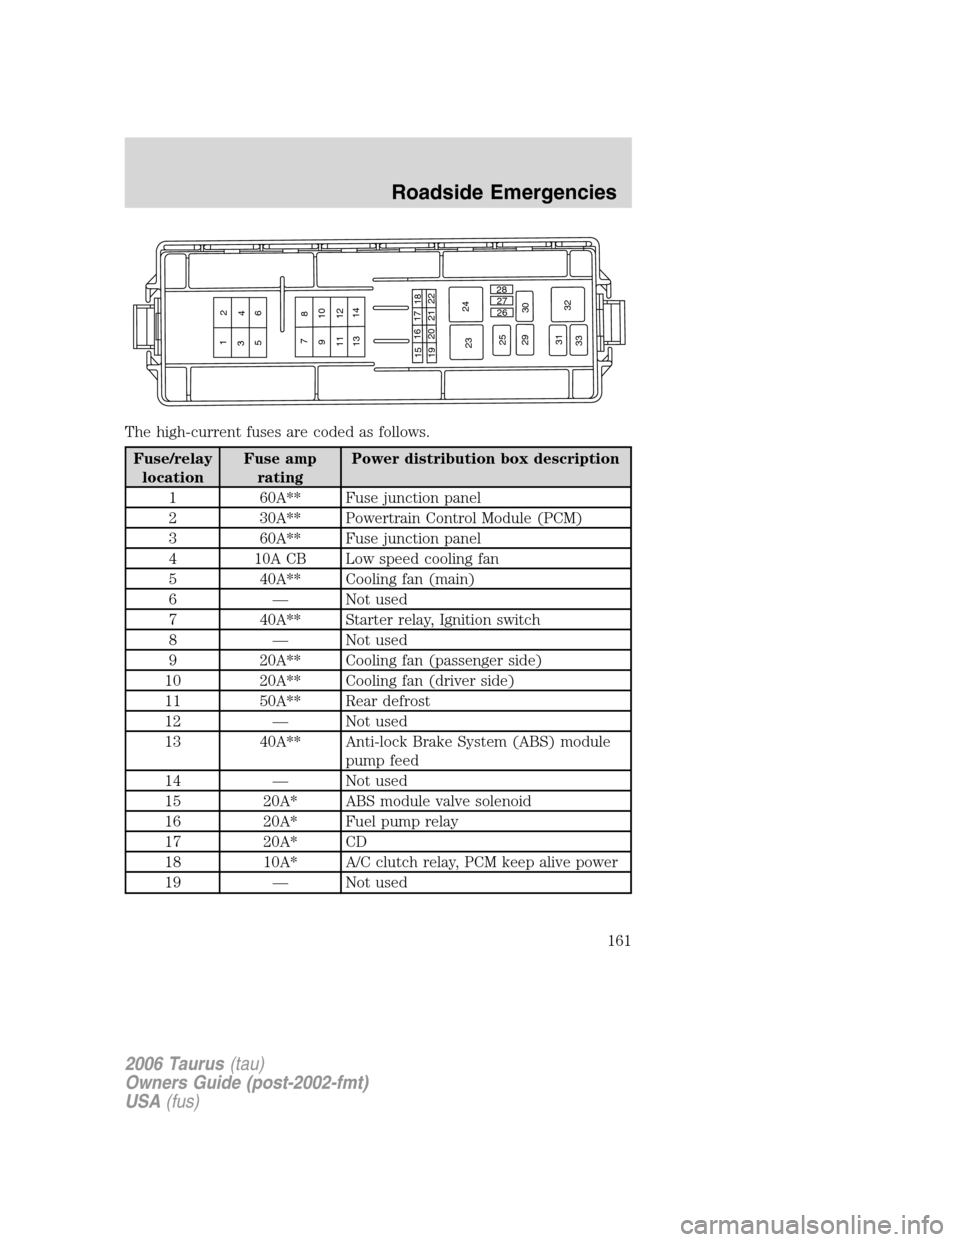 FORD TAURUS 2006 4.G Owners Manual The high-current fuses are coded as follows.
Fuse/relay
locationFuse amp
ratingPower distribution box description
1 60A** Fuse junction panel
2 30A** Powertrain Control Module (PCM)
3 60A** Fuse junct